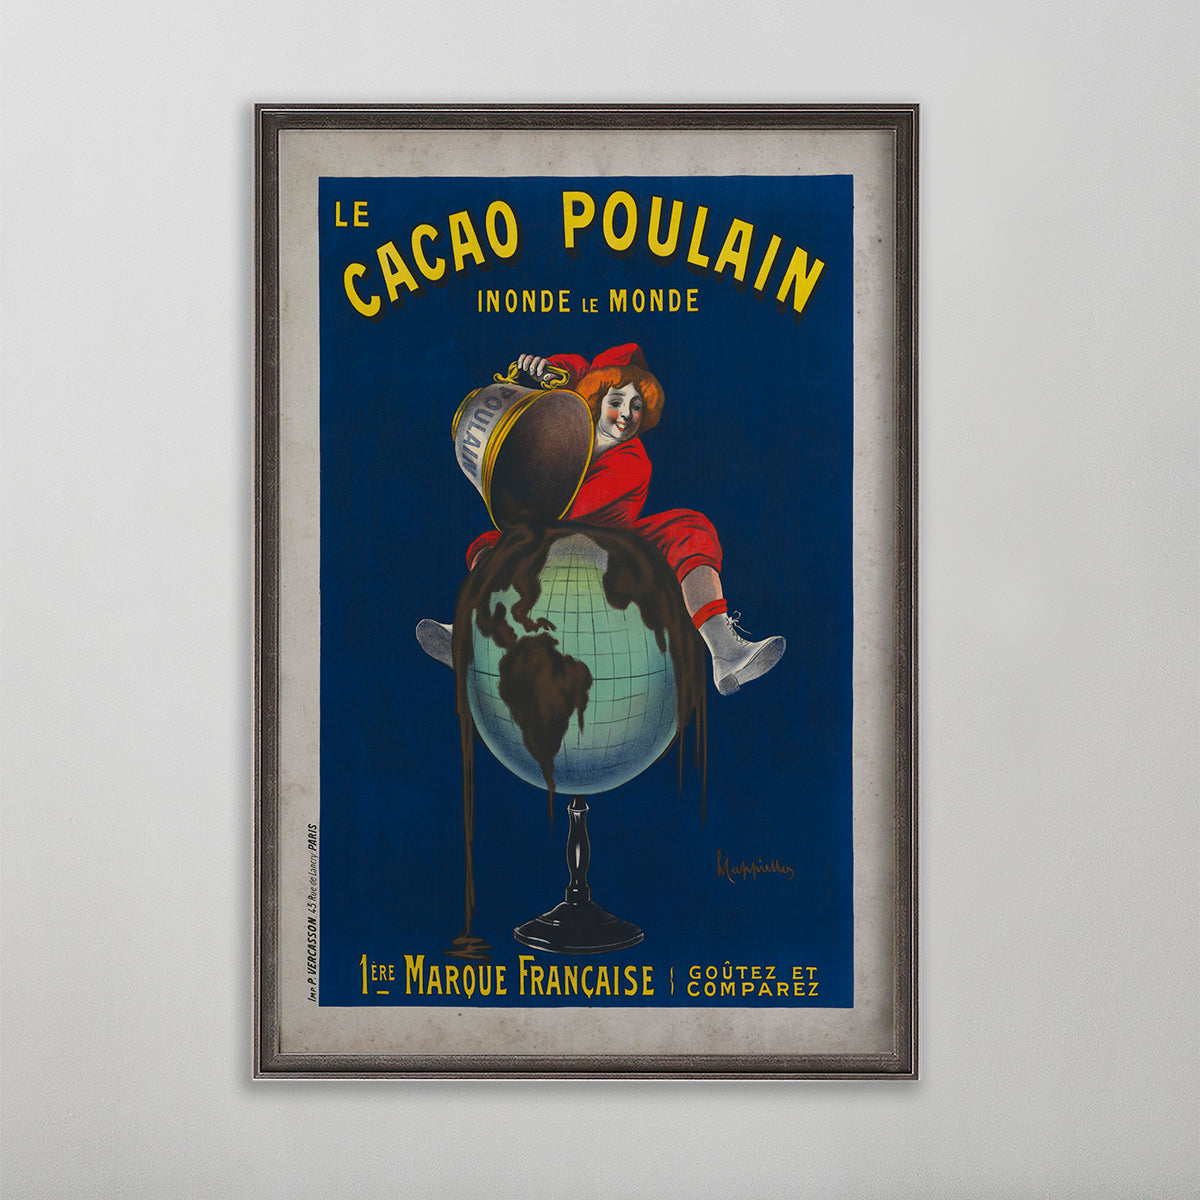 Le Cacao Poulain vintage poster wall art by leonetto cappiello. Boy sitting on globe pouring chocolate on the globe.